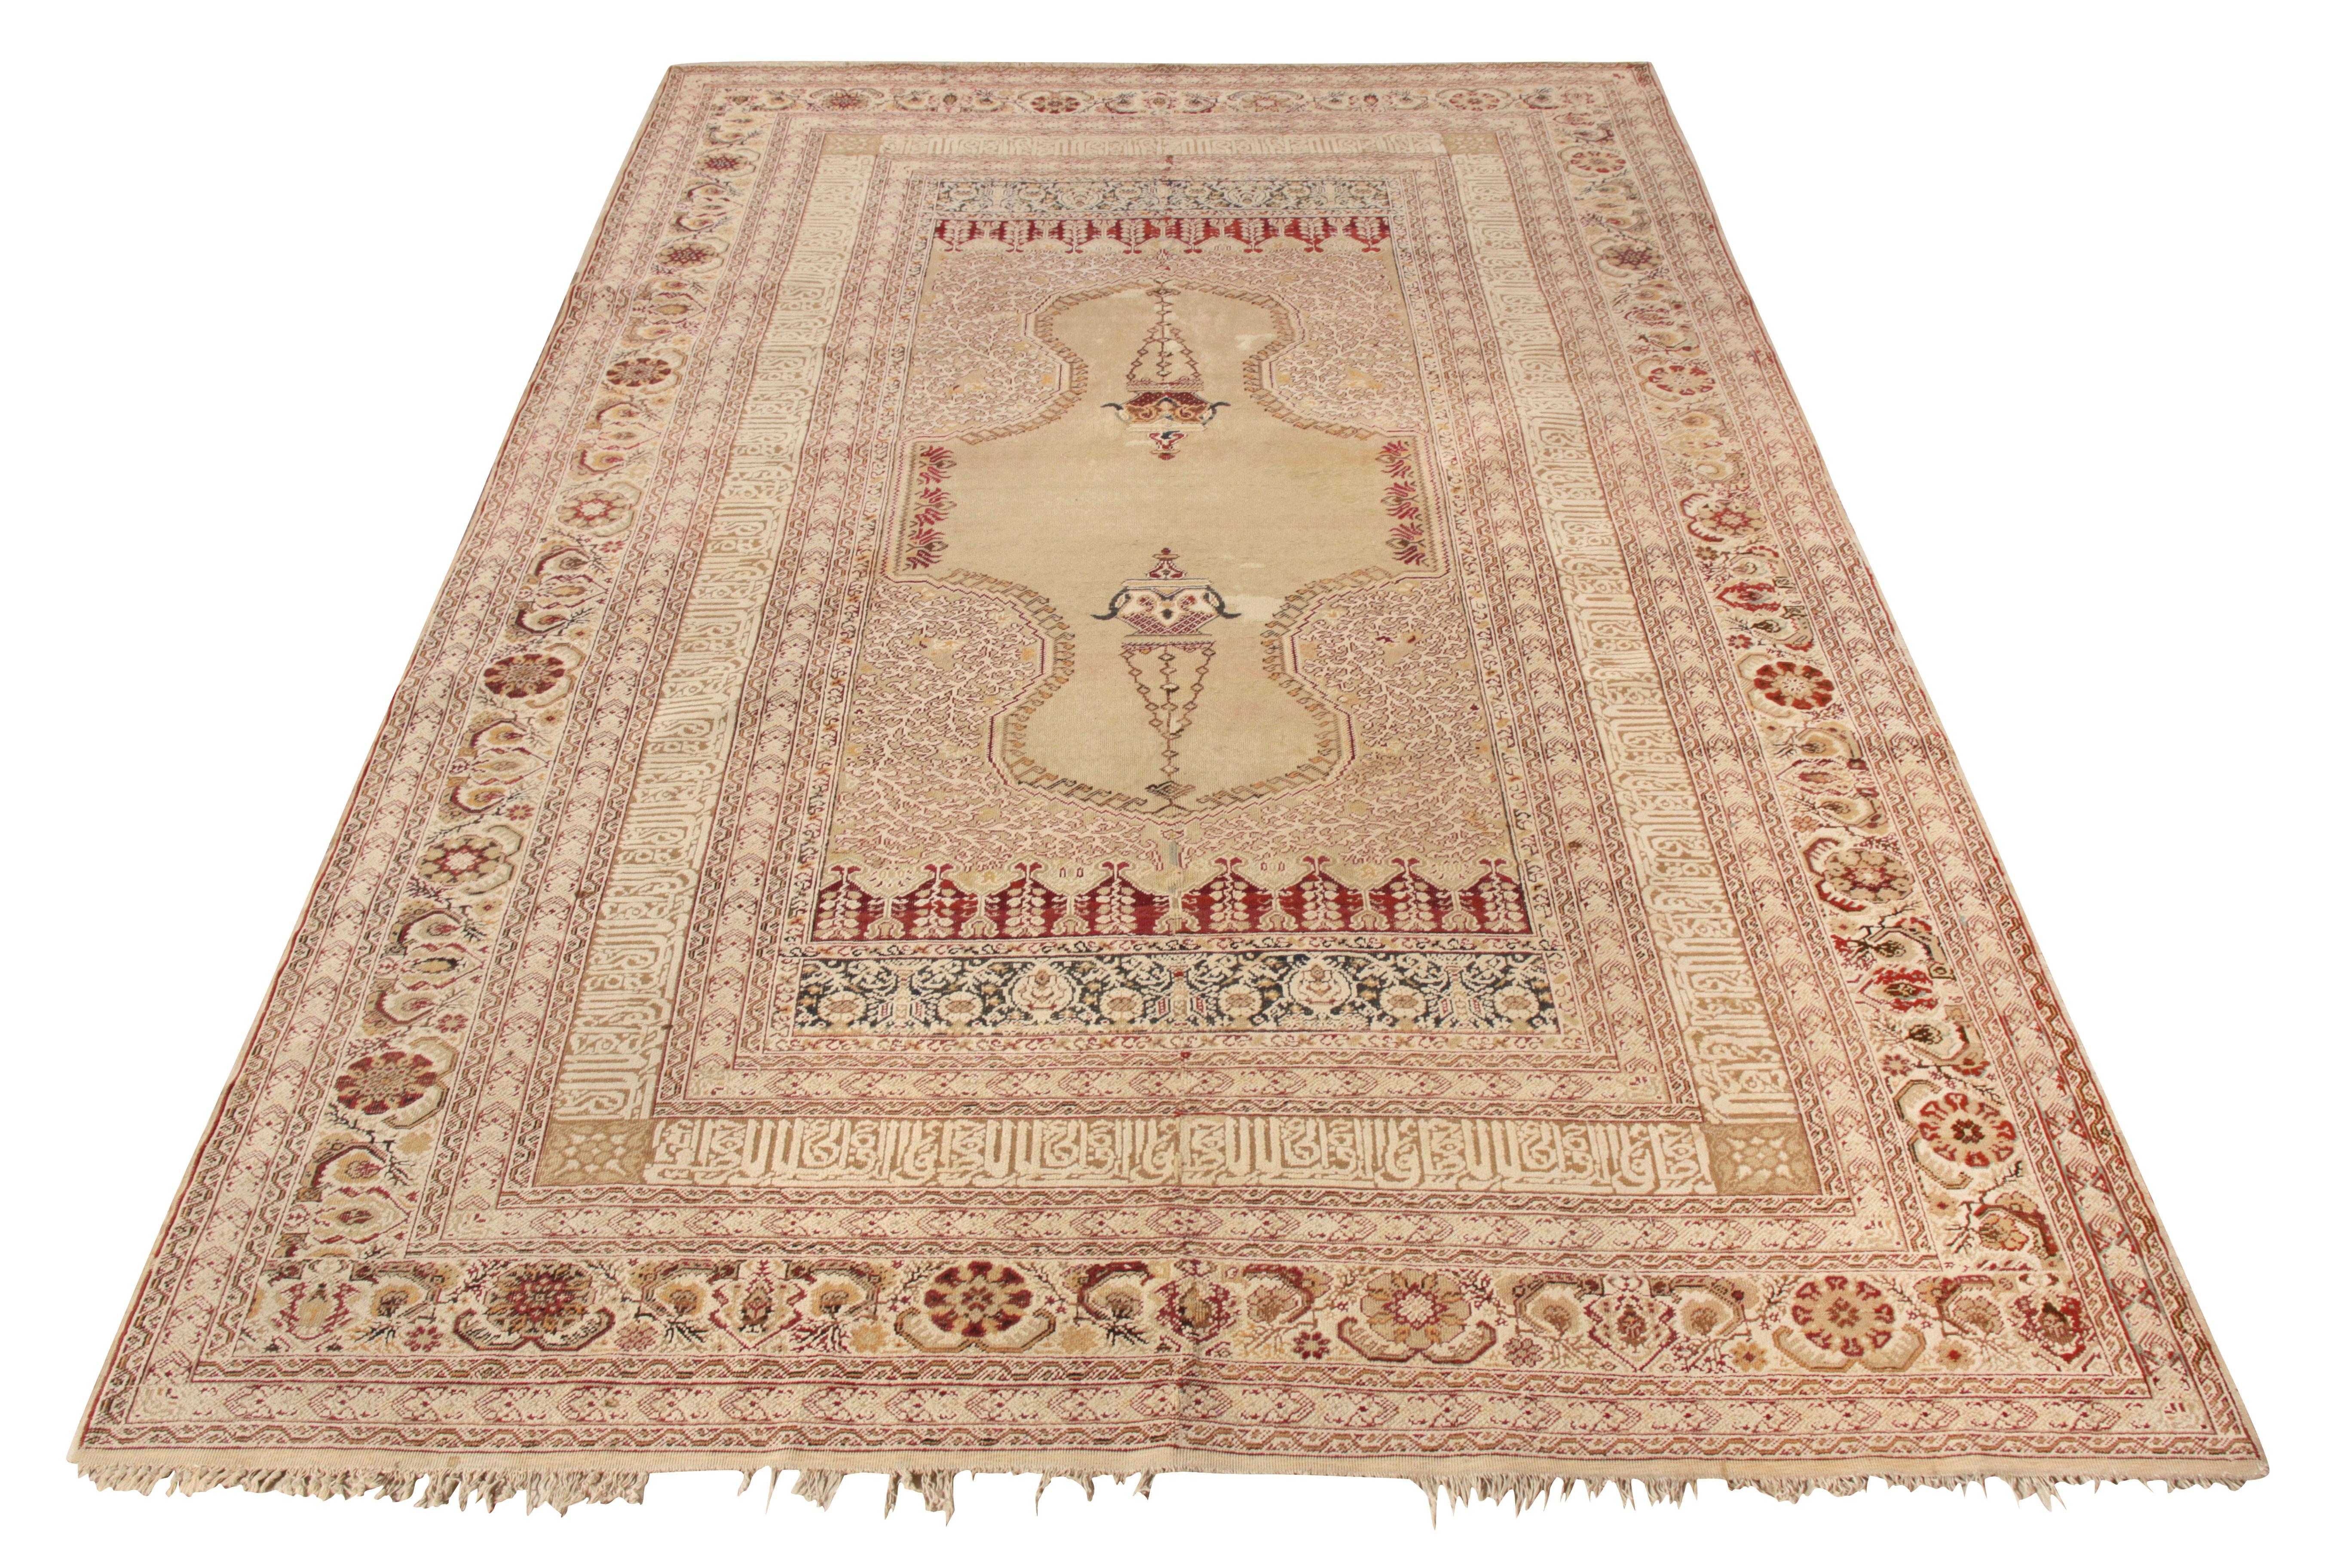 A hand-knotted marvel originating from Turkey circa 1920-1930, this antique 6x9 Ghiordes rug is skillfully crafted in a premium blend of wool and cotton. Owning a unique composition, the rug commands attention to its striking pseudo-medallion